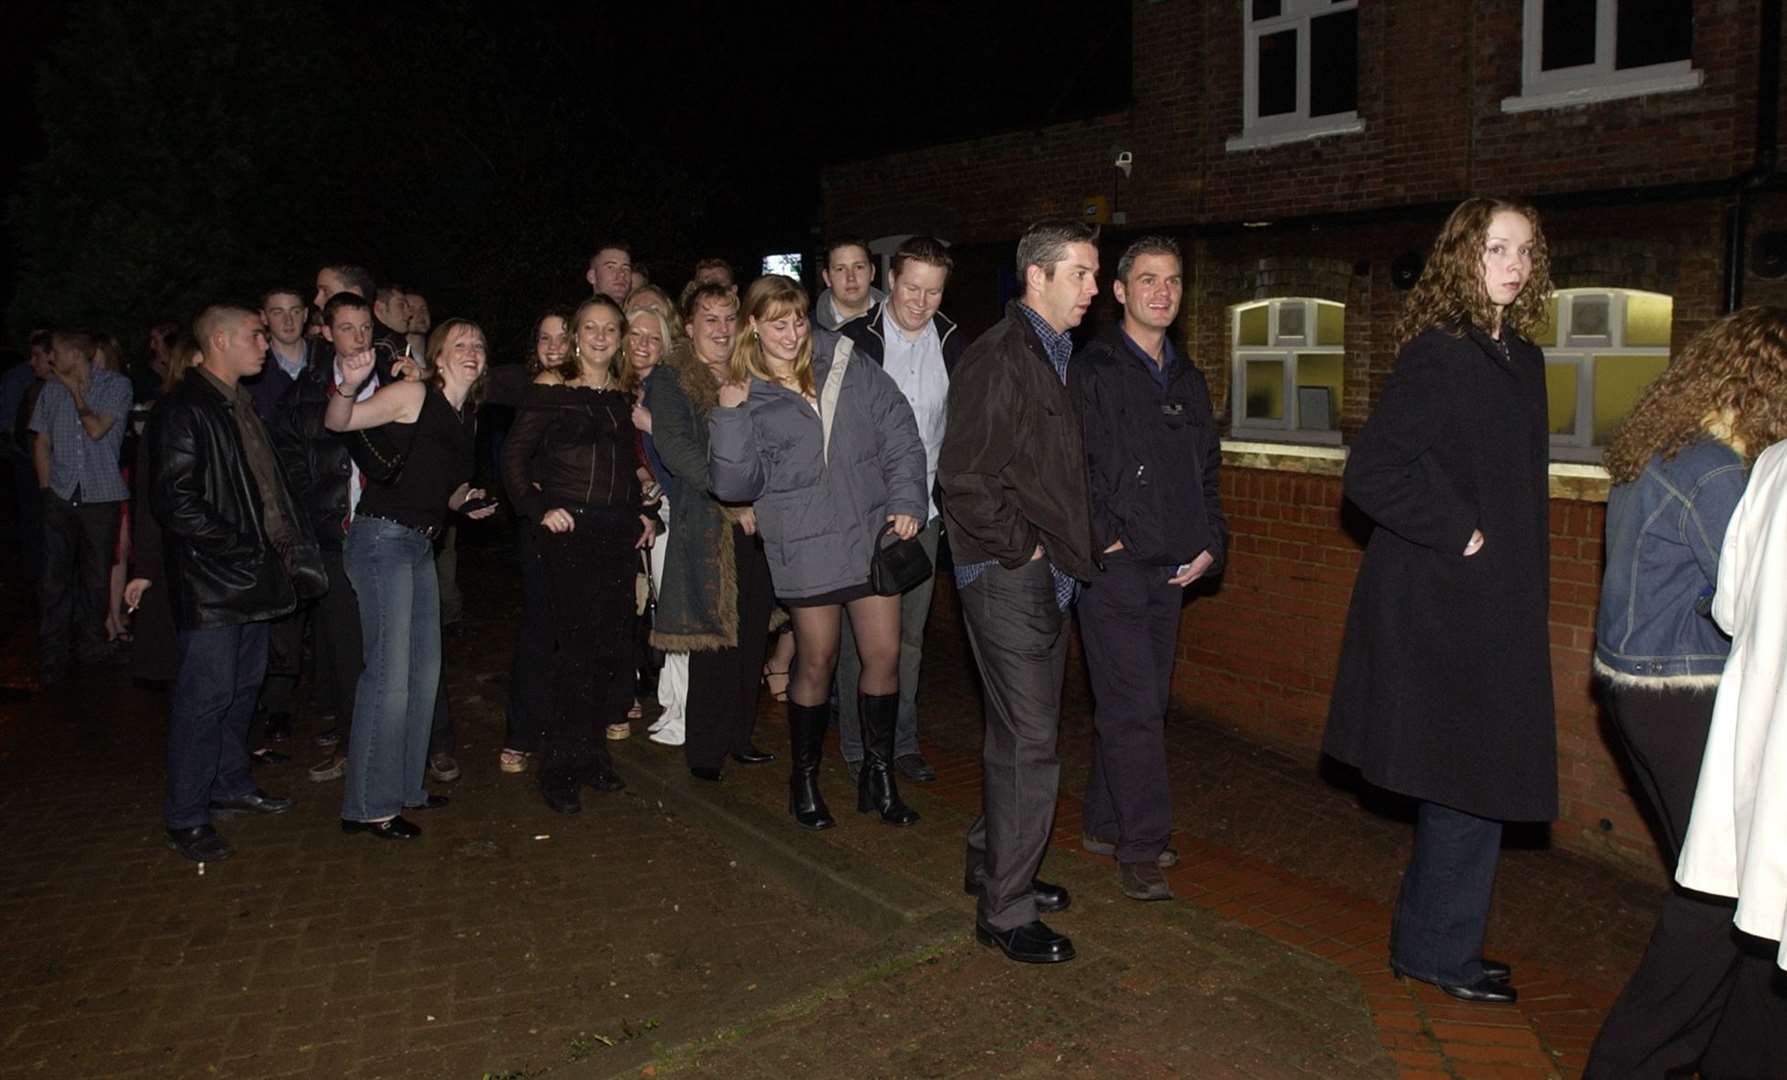 Queues for Liquid's opening night in November 2002